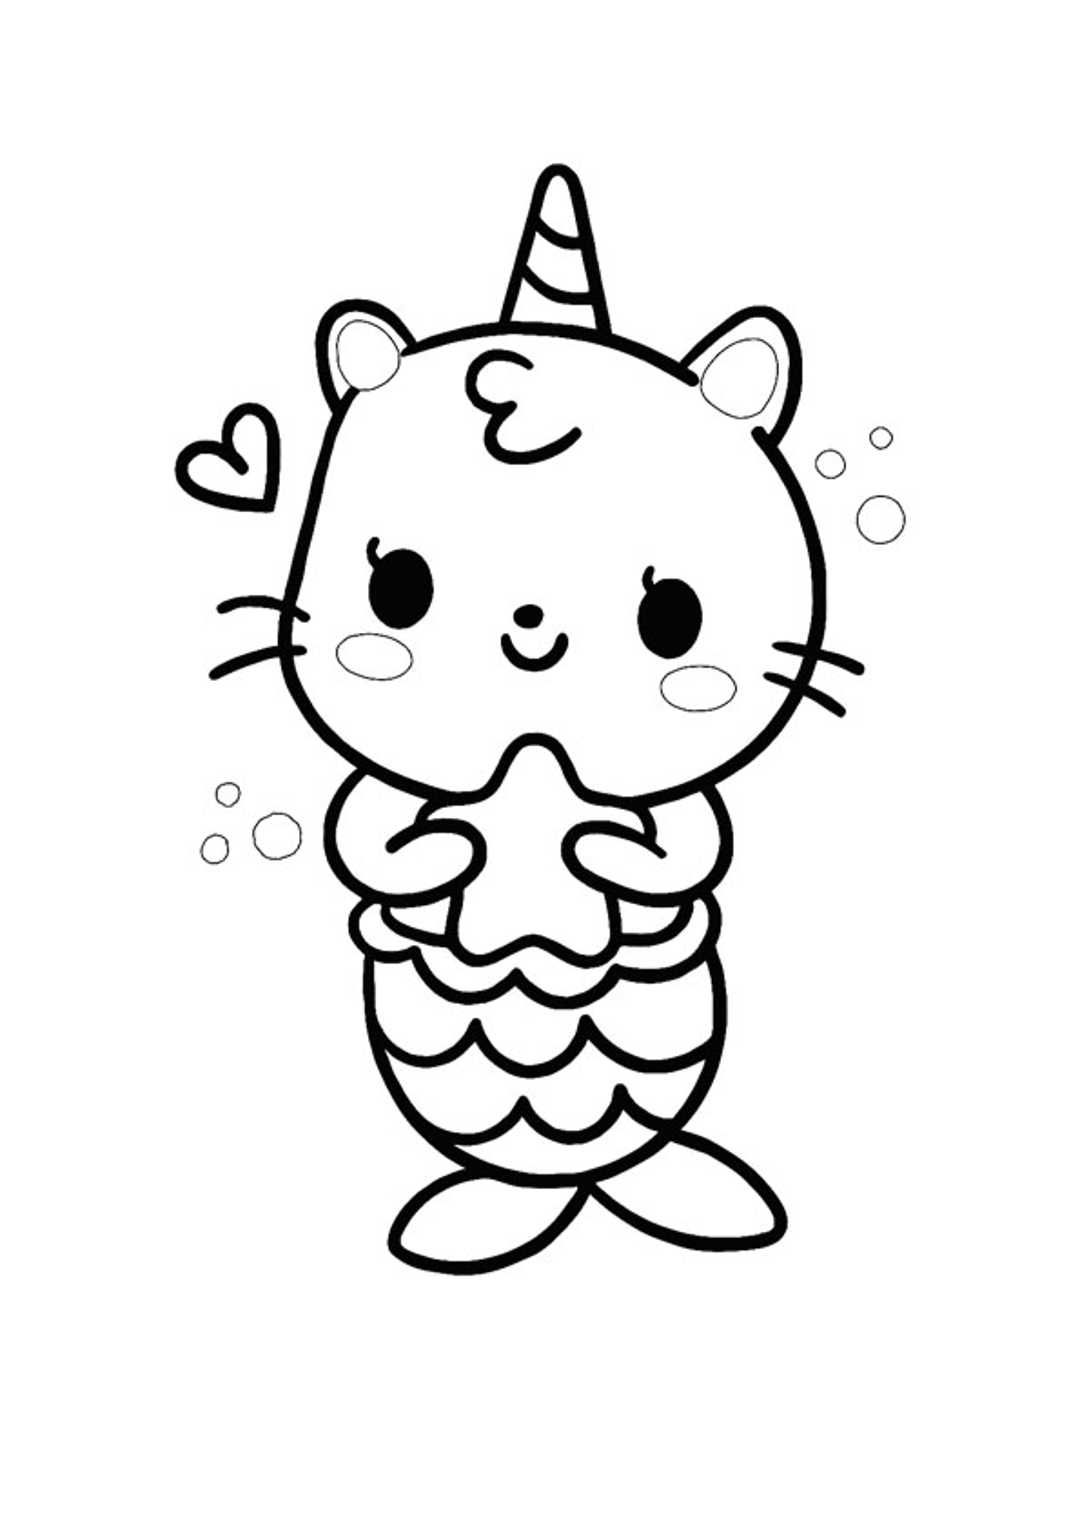 Unicorn Mermaid Coloring Pages | Mermaid Coloring Pages, Unicorn